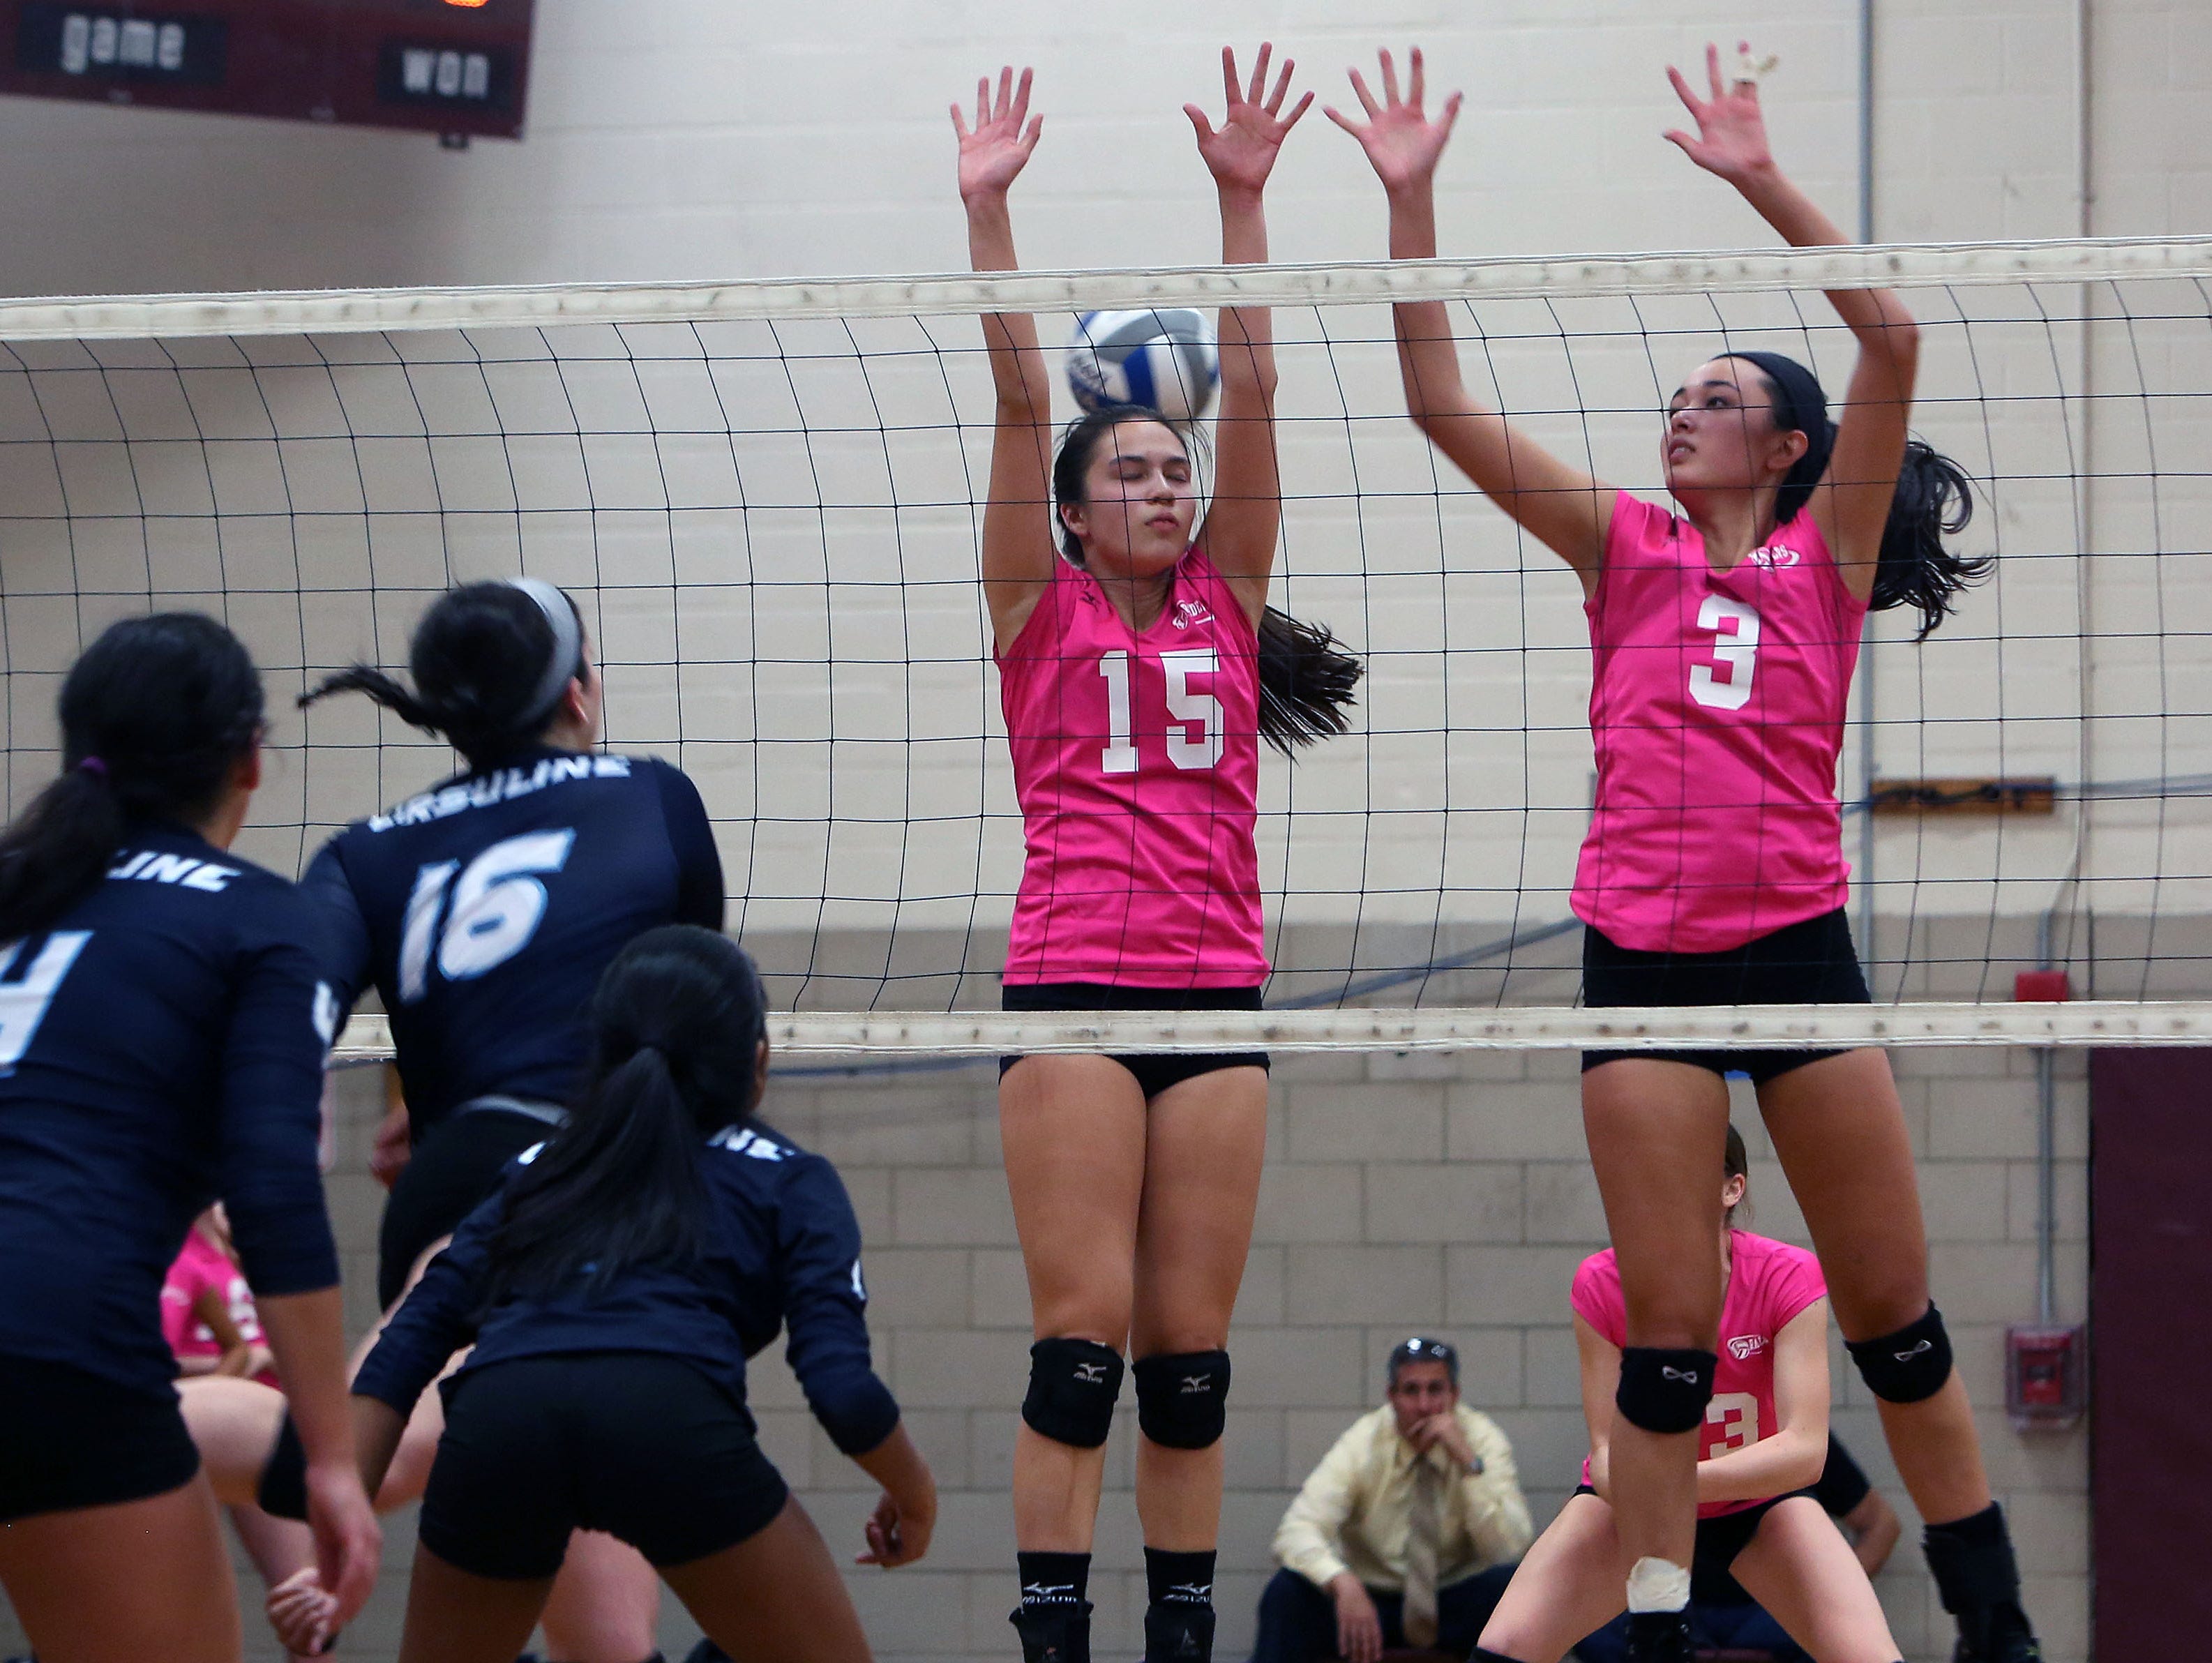 Scarsdale swept Ursuline, 25-20, 25-16, and 25-23 in volleyball action at Scarsdale High School Oct. 20, 2015.